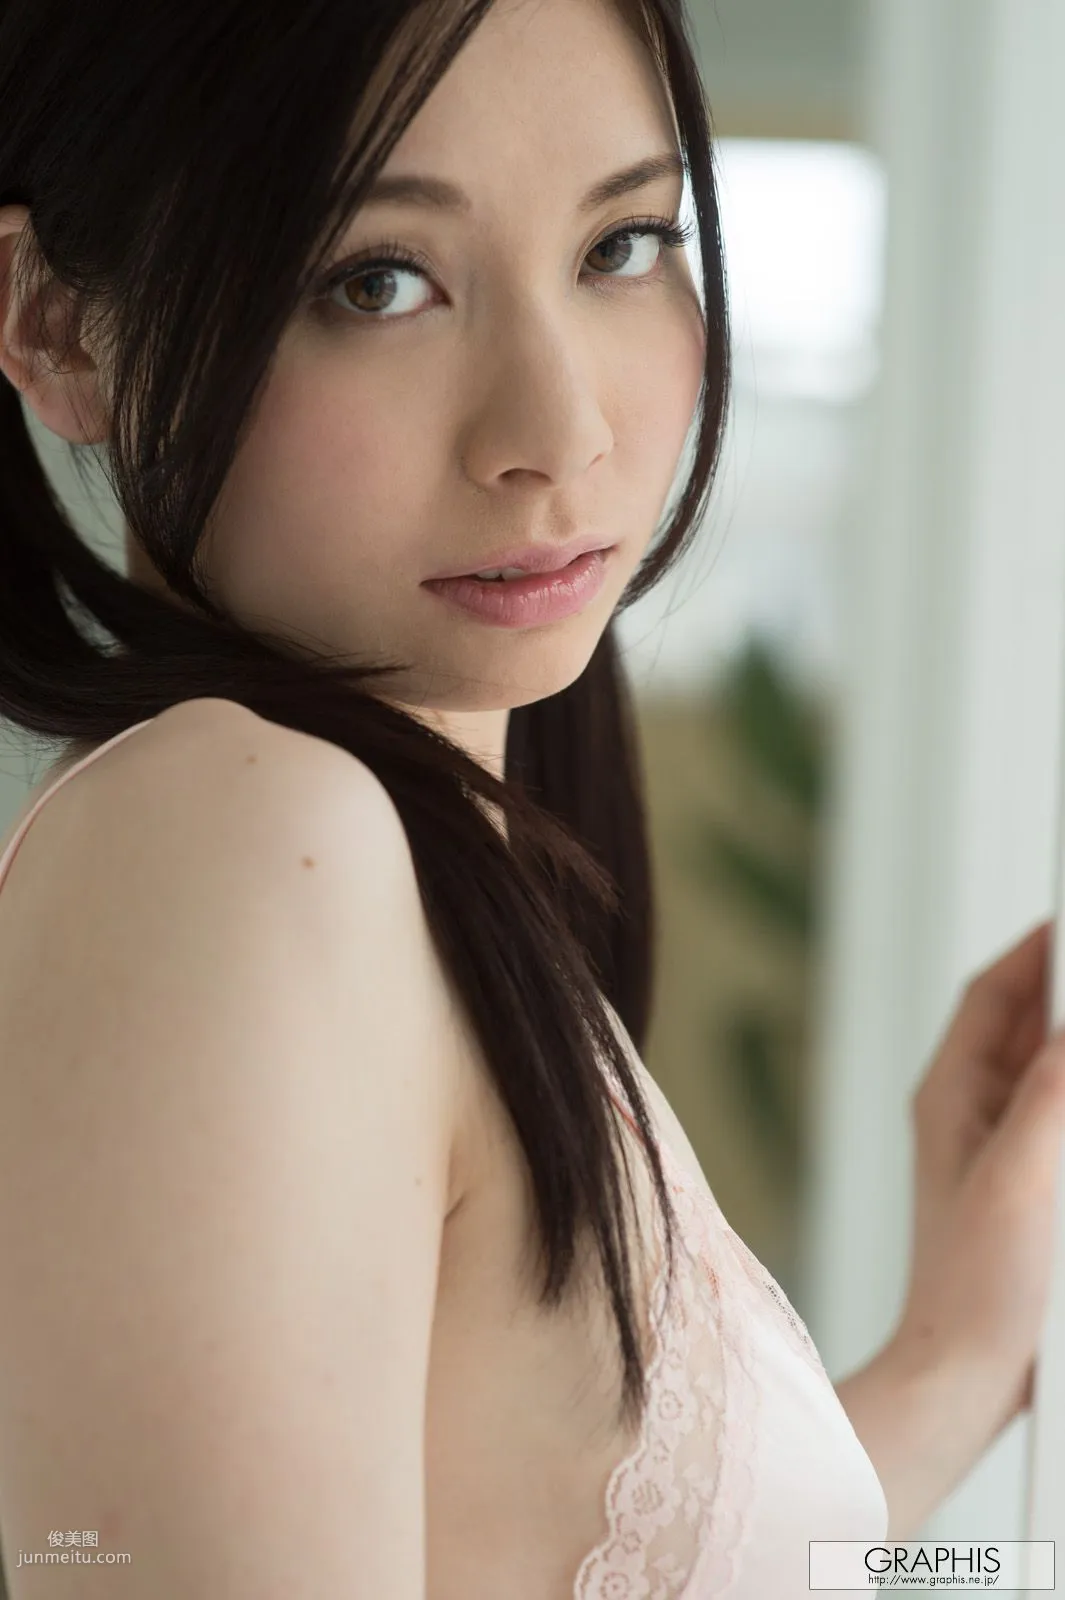 Anno An 庵野杏 [Graphis] First Gravure 初脱ぎ娘 写真集36